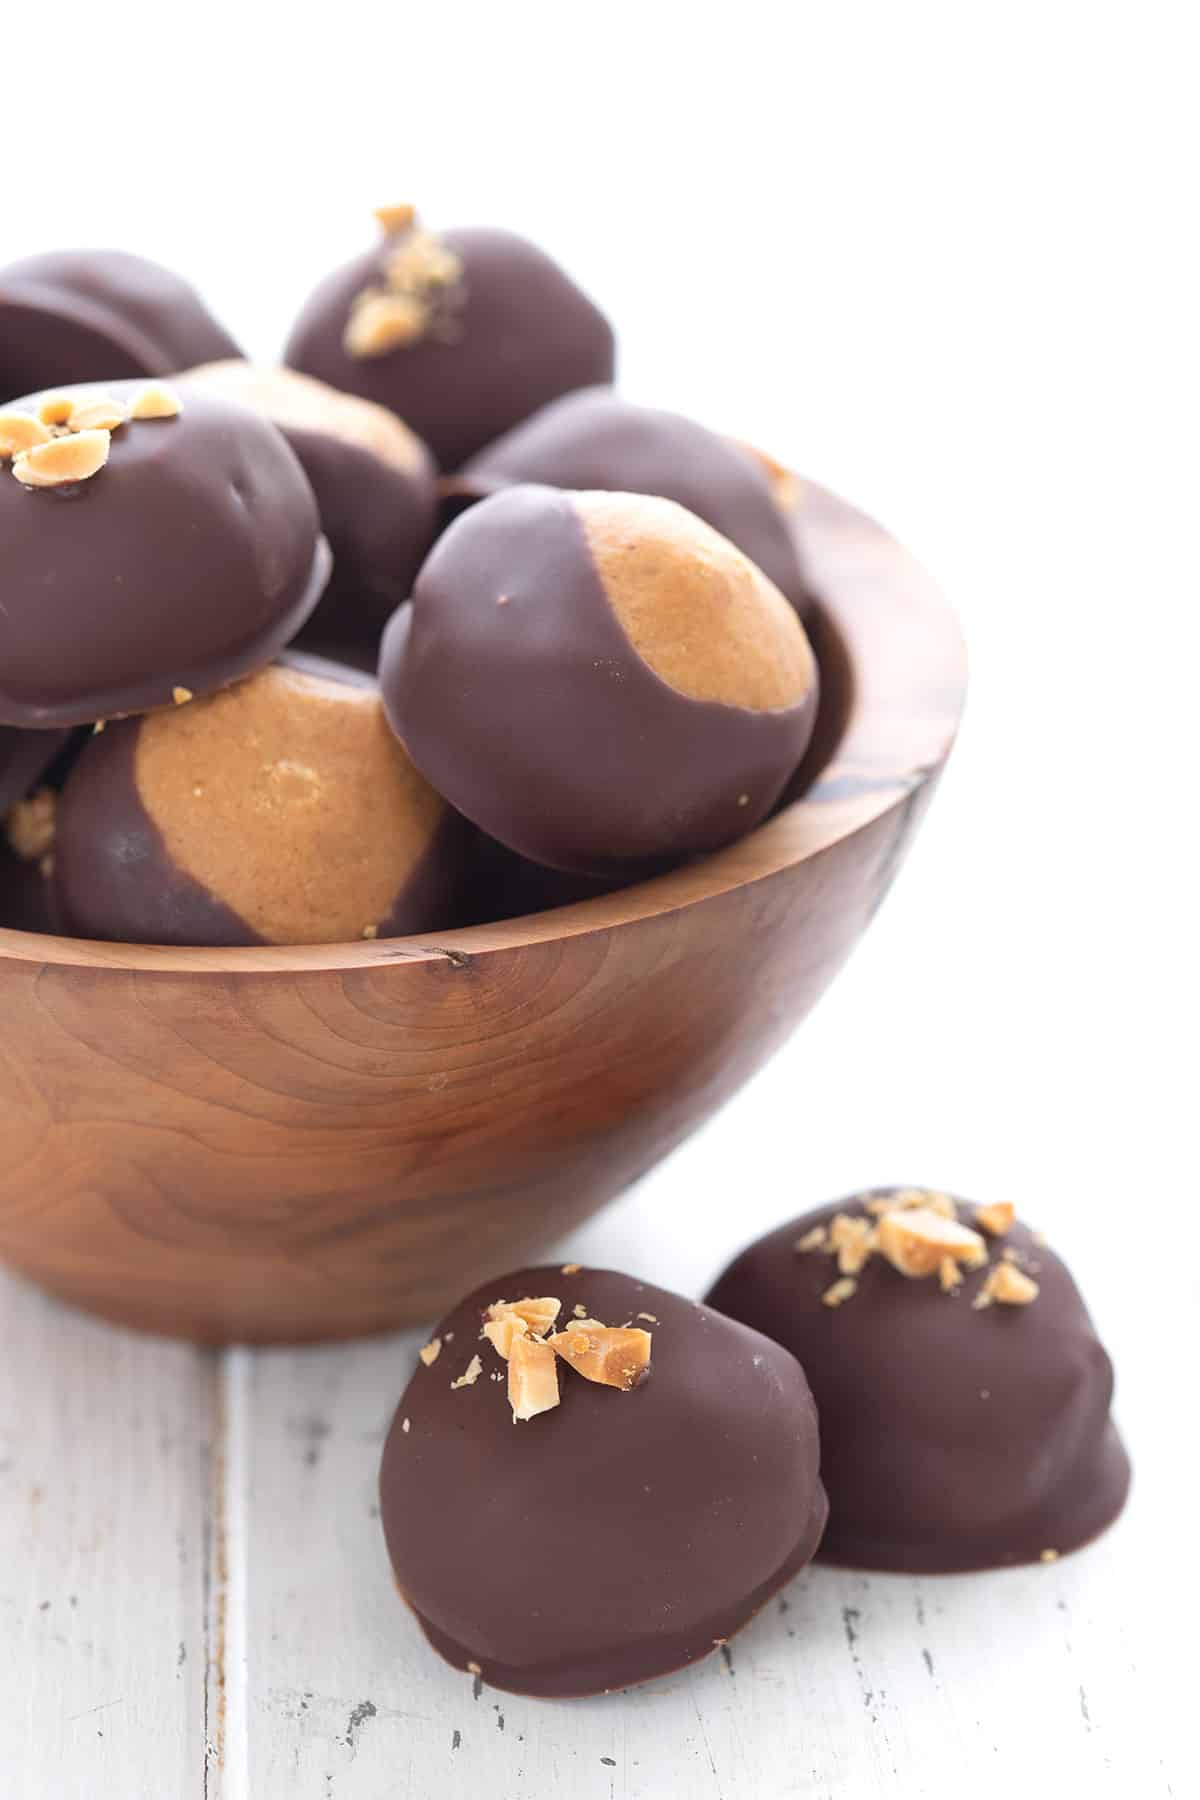 Keto peanut butter balls on a white table in front of a wooden bowl holding more balls.